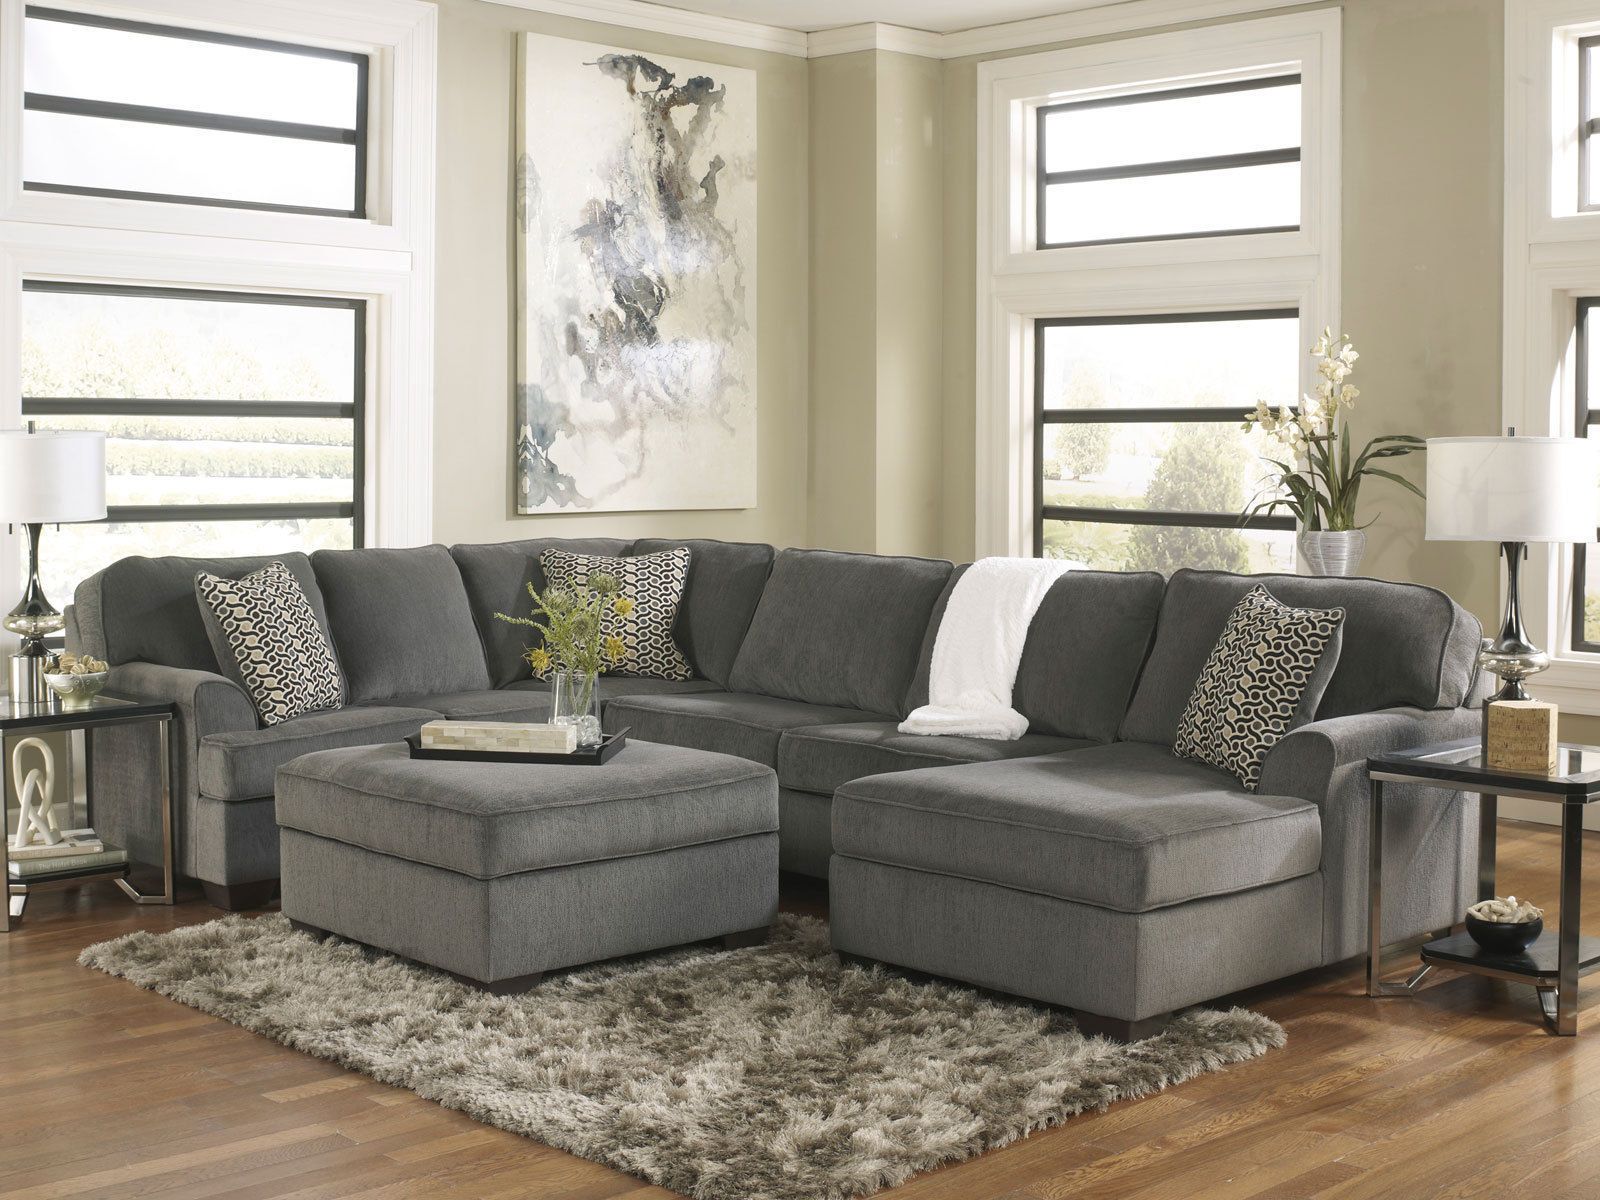 Sole Oversized Modern Gray Fabric Sofa Couch Sectional Set Living Room Throughout Modern Light Grey Loveseat Sofas (Gallery 13 of 20)